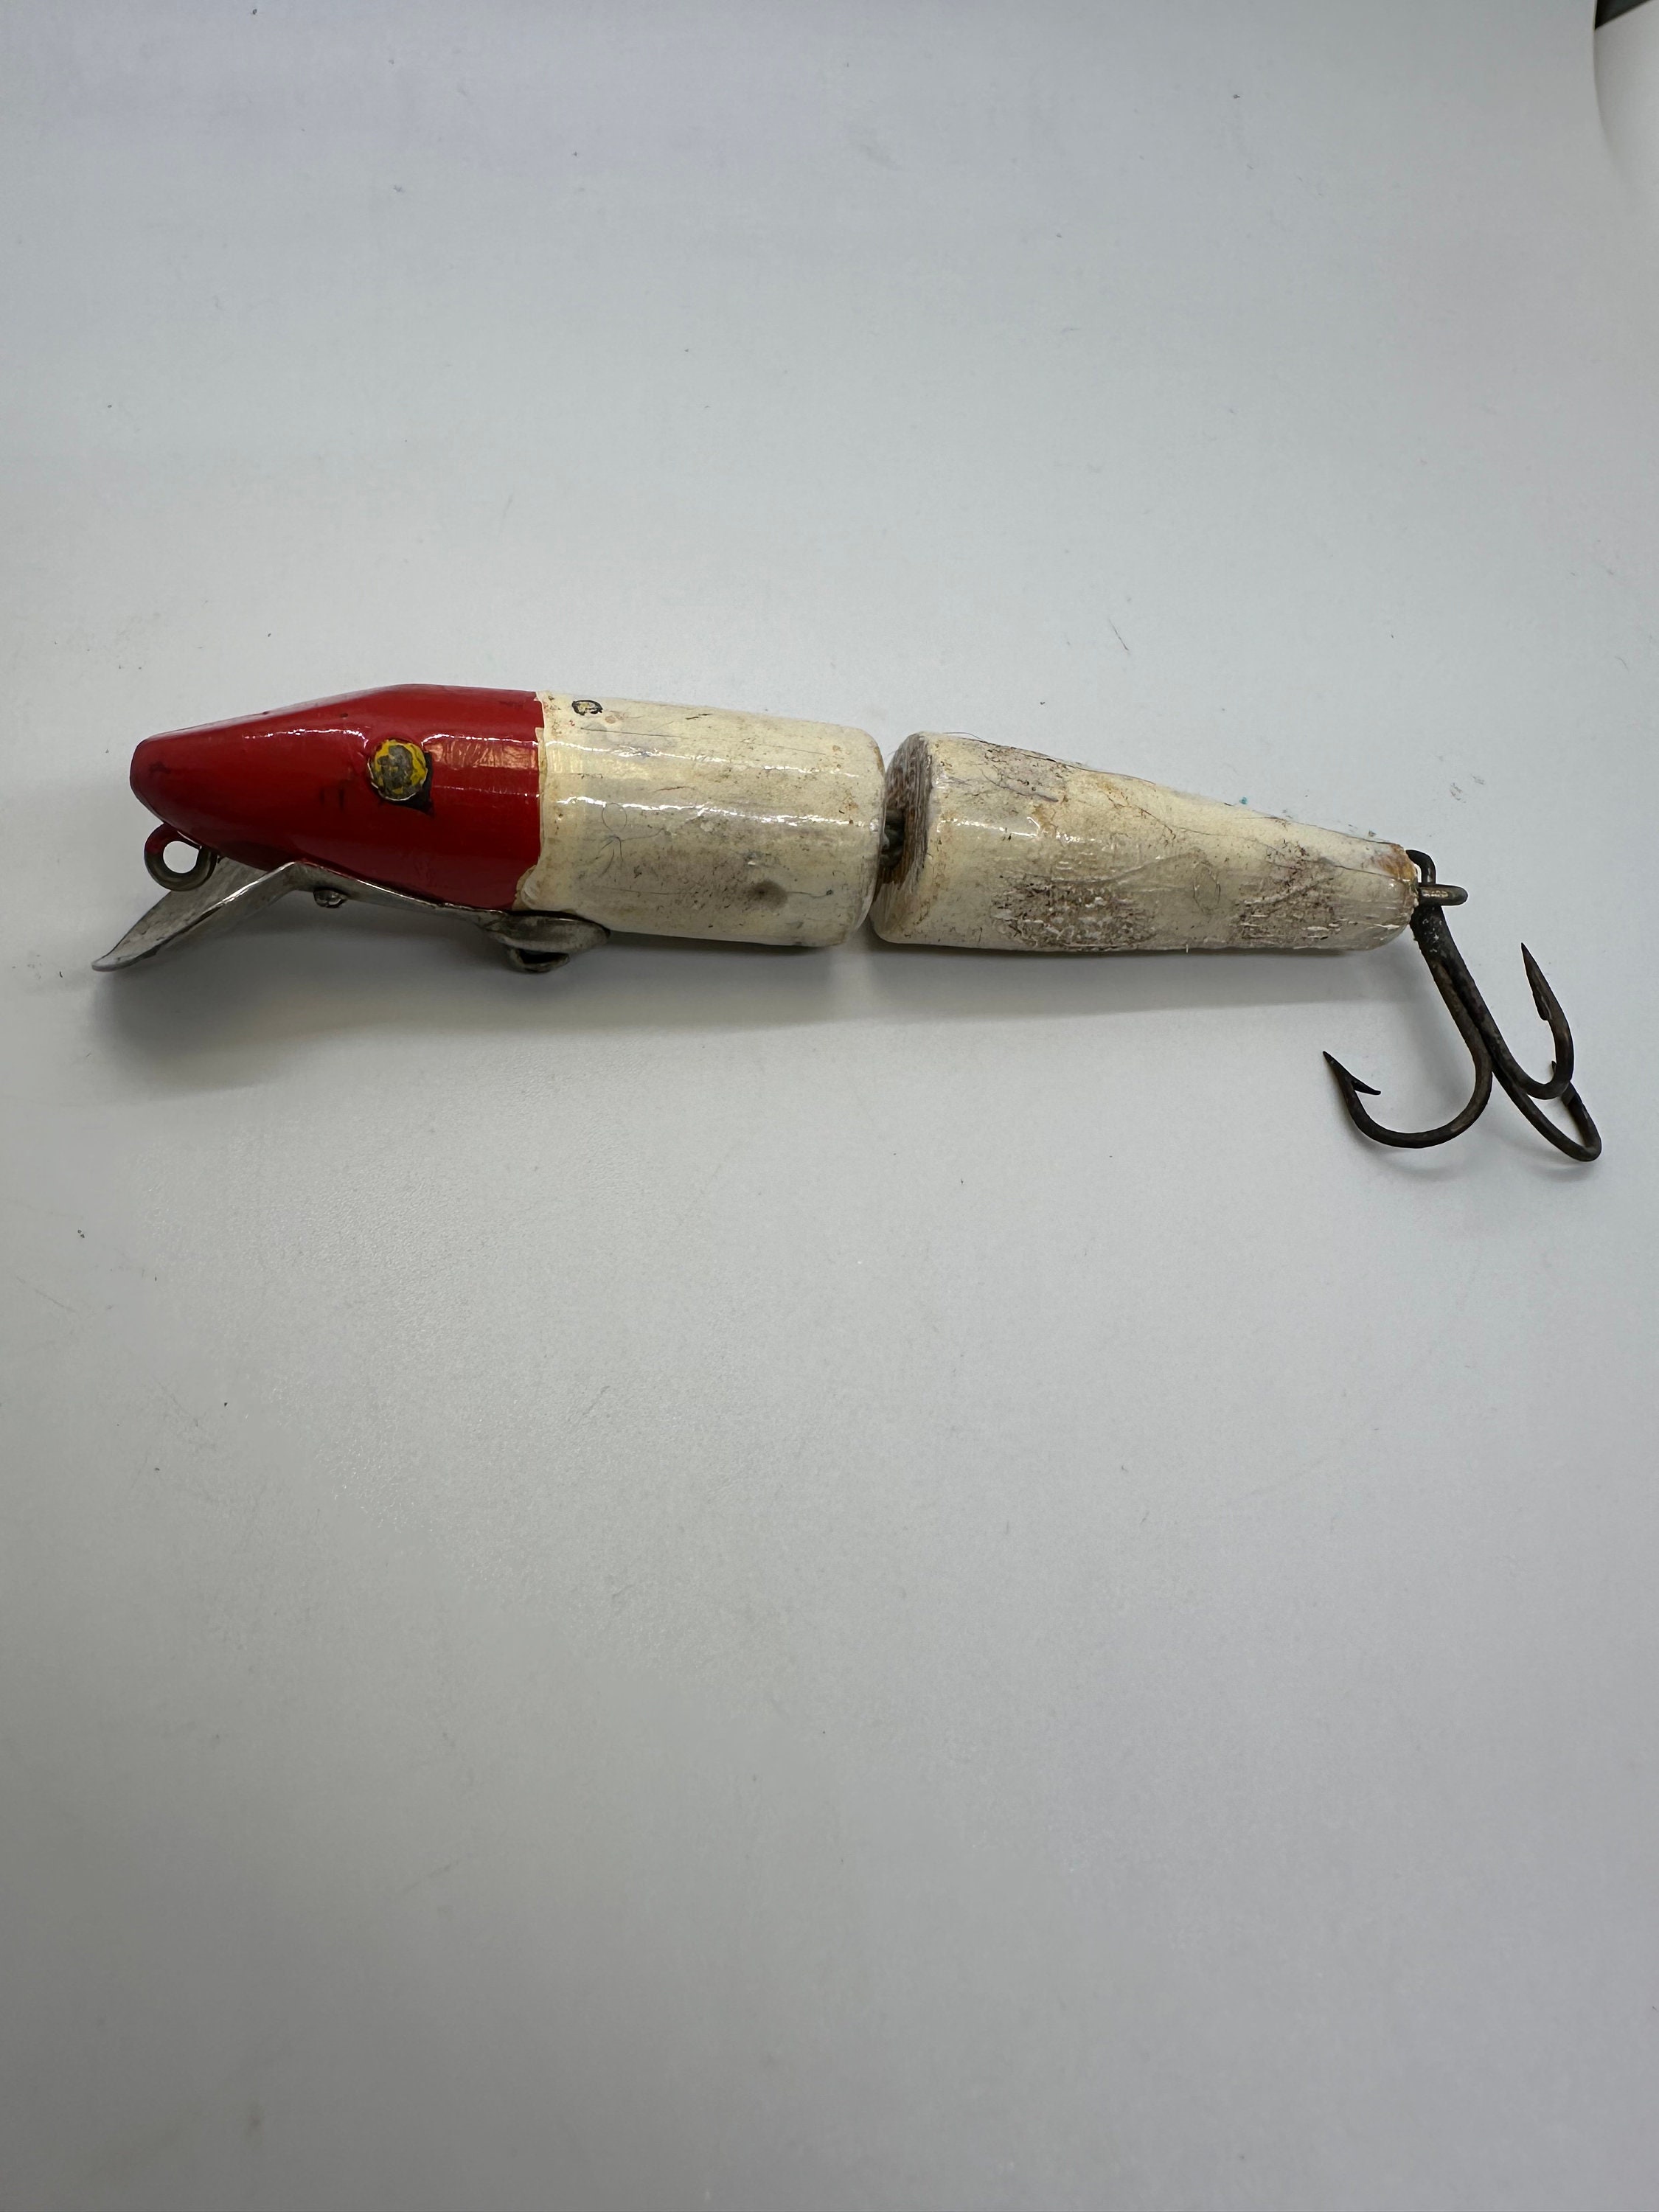 ANTIQUE WOOD FOLK ART HAND CARVED SURPRISE MINNOW FISHING LURE